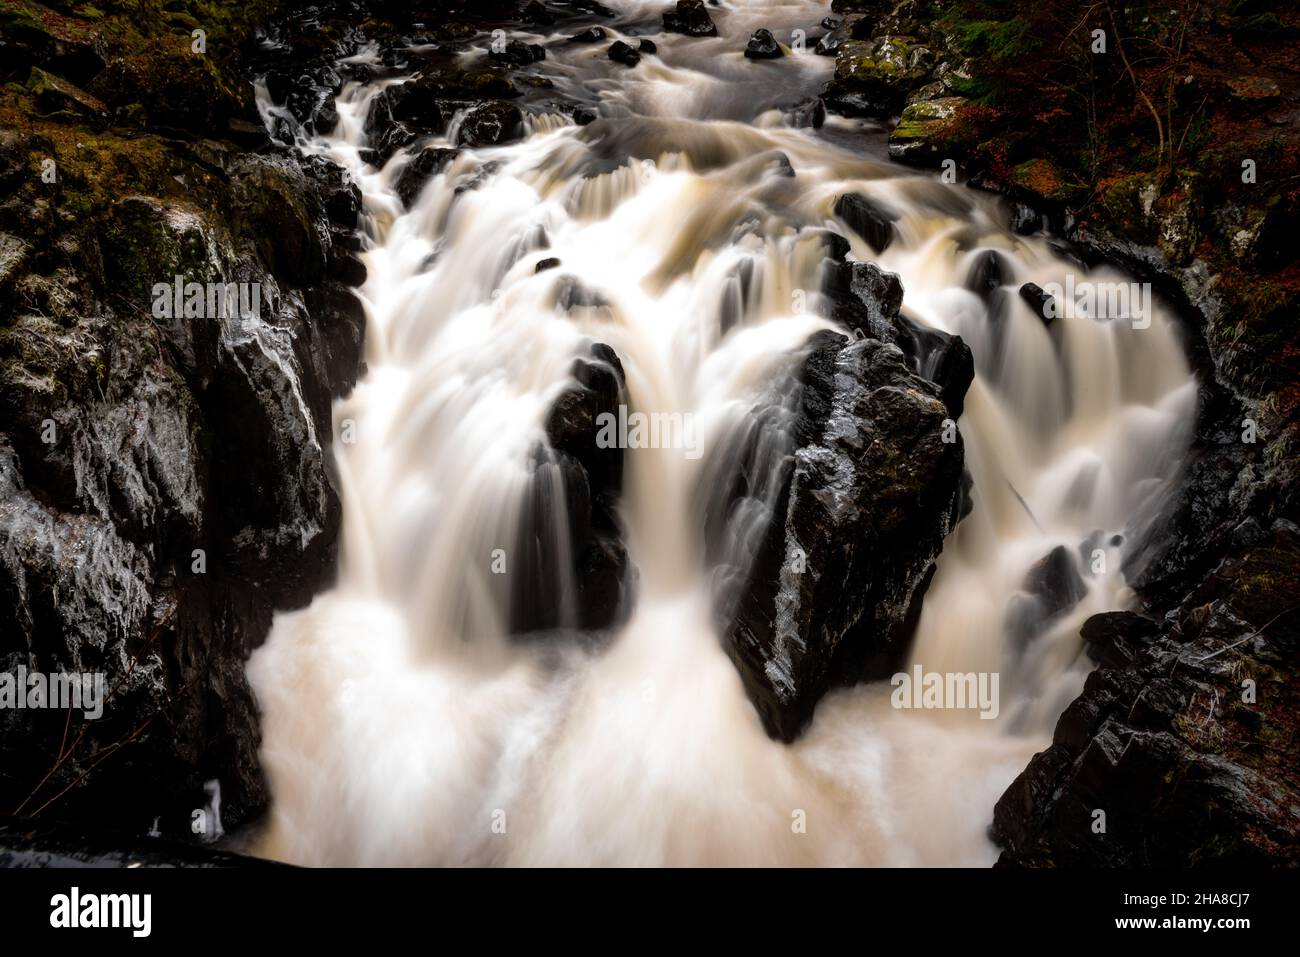 Frozen stones in Highland river at The Hermitage, Pitlochry, Scotland Stock Photo